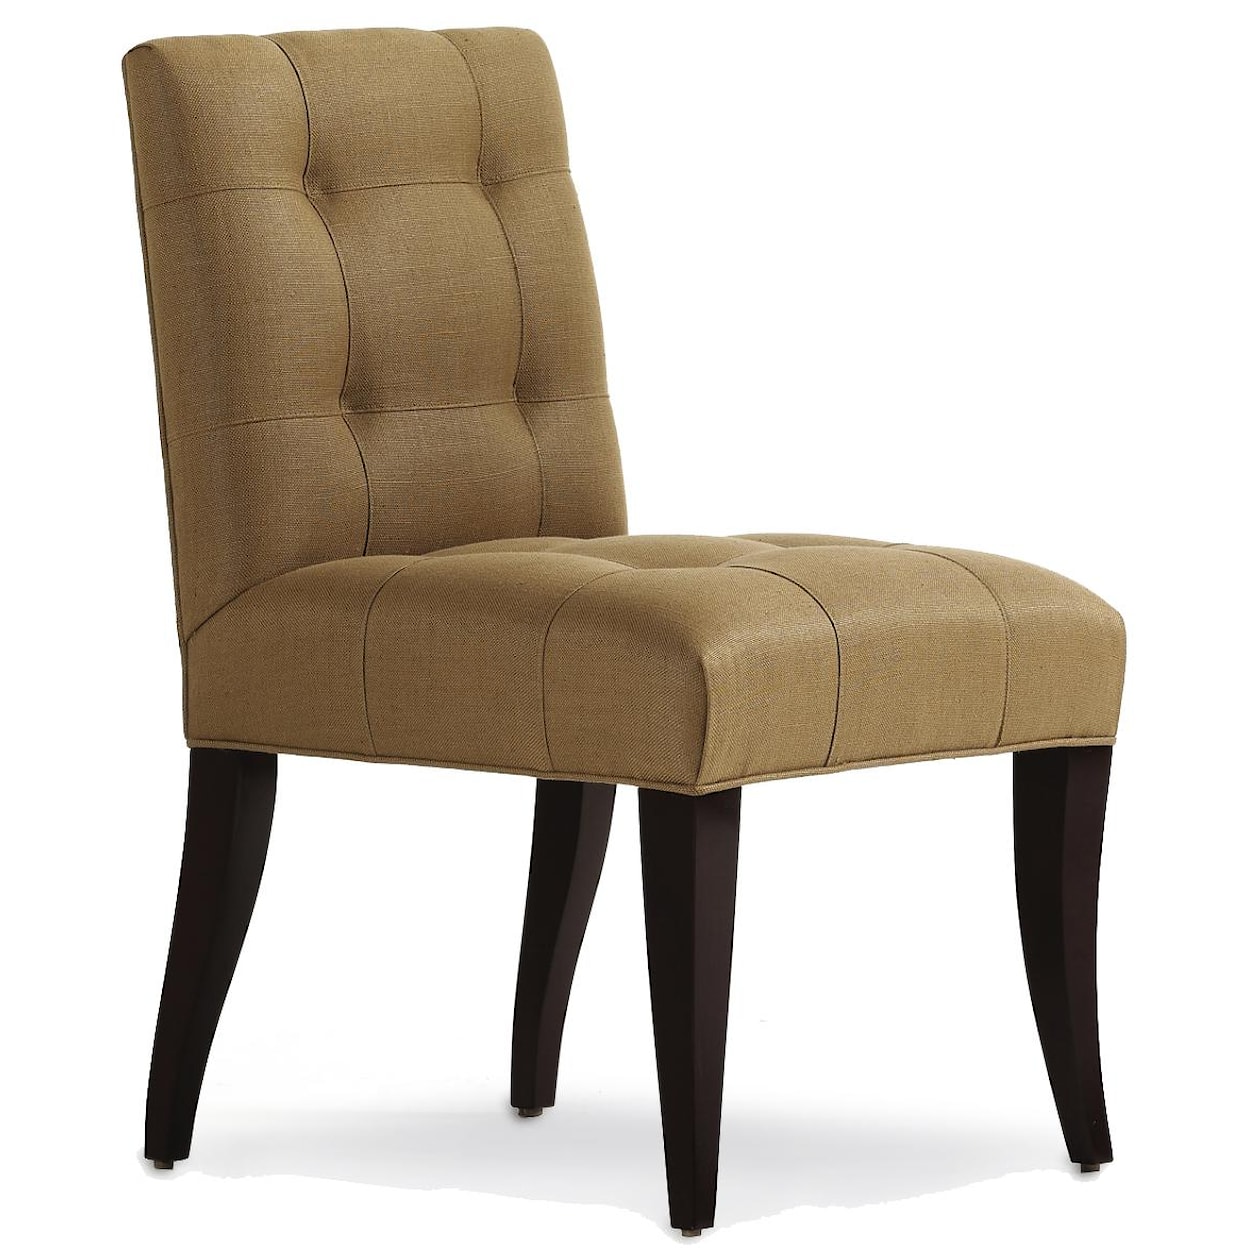 Jessica Charles Fine Upholstered Accents Mann Dining Chair   